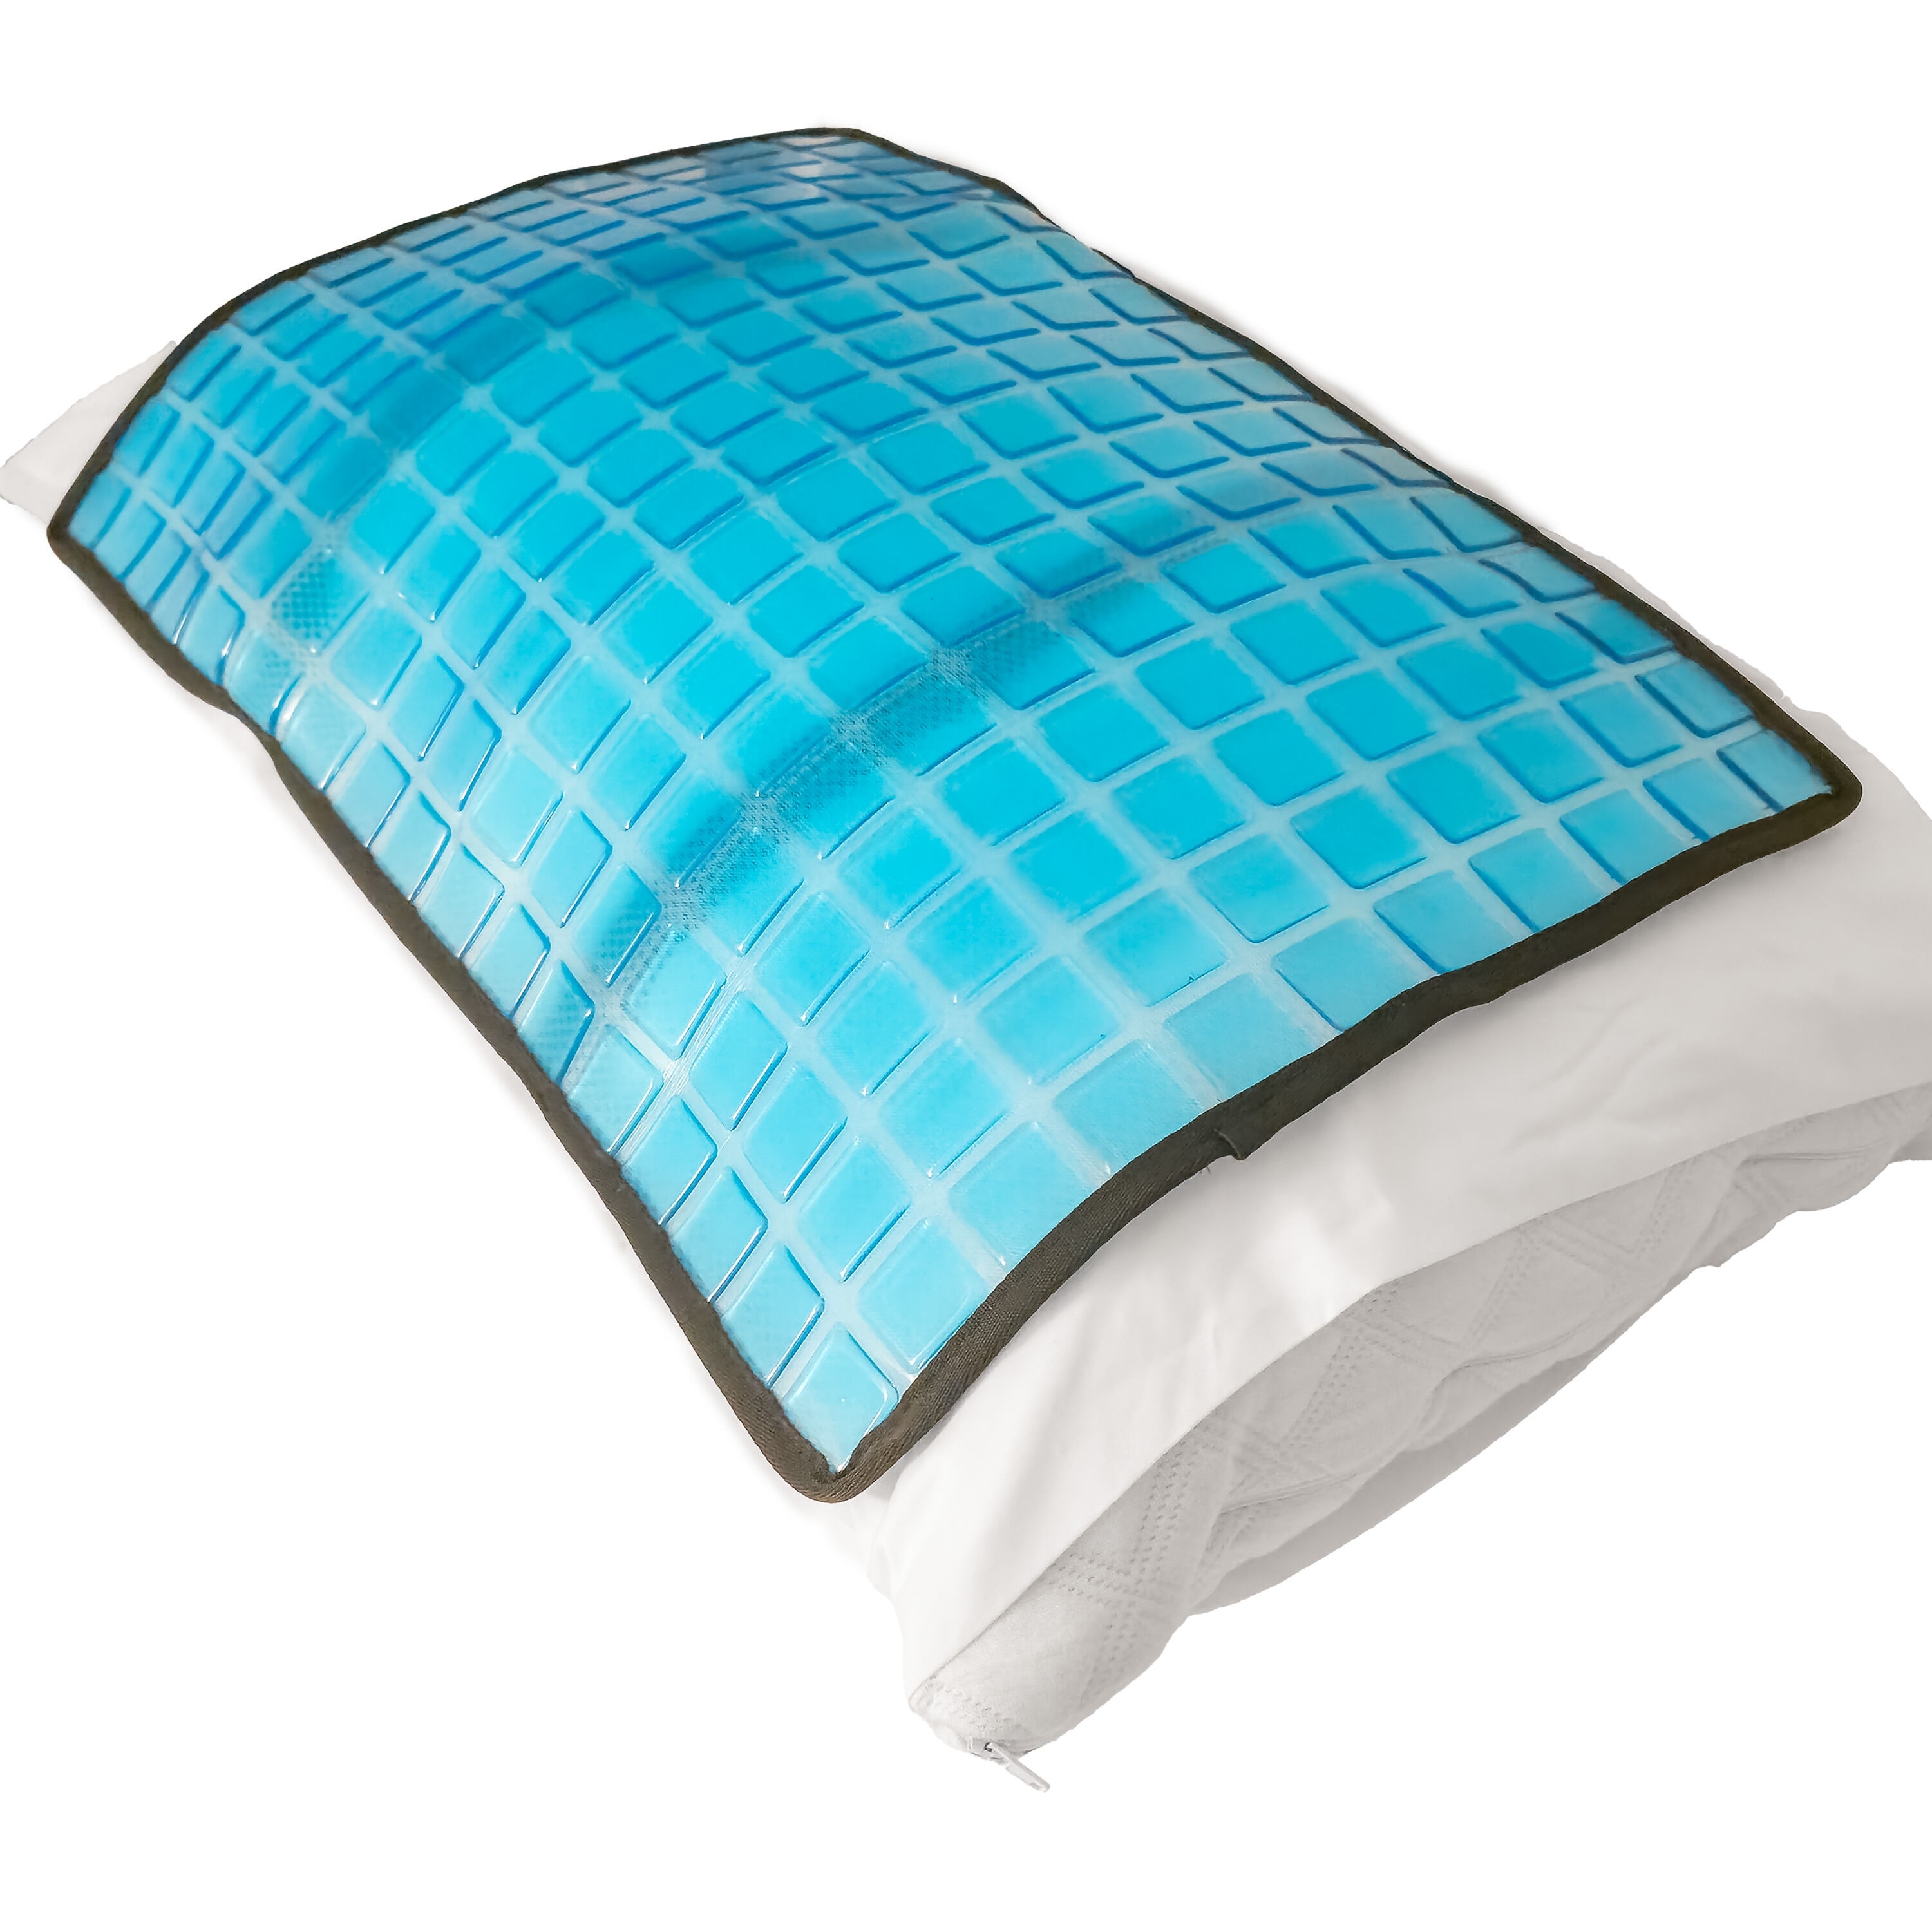 https://ak1.ostkcdn.com/images/products/is/images/direct/f771e678bd09c46d7a15d44cd7d98f5c206bb8ab/Cooling-Gel-Pillow-Pad-w-Chill-Gel-Cells-Cooling-Mat-For-Hot-Flashes%2C-Dog-%26-More.jpg